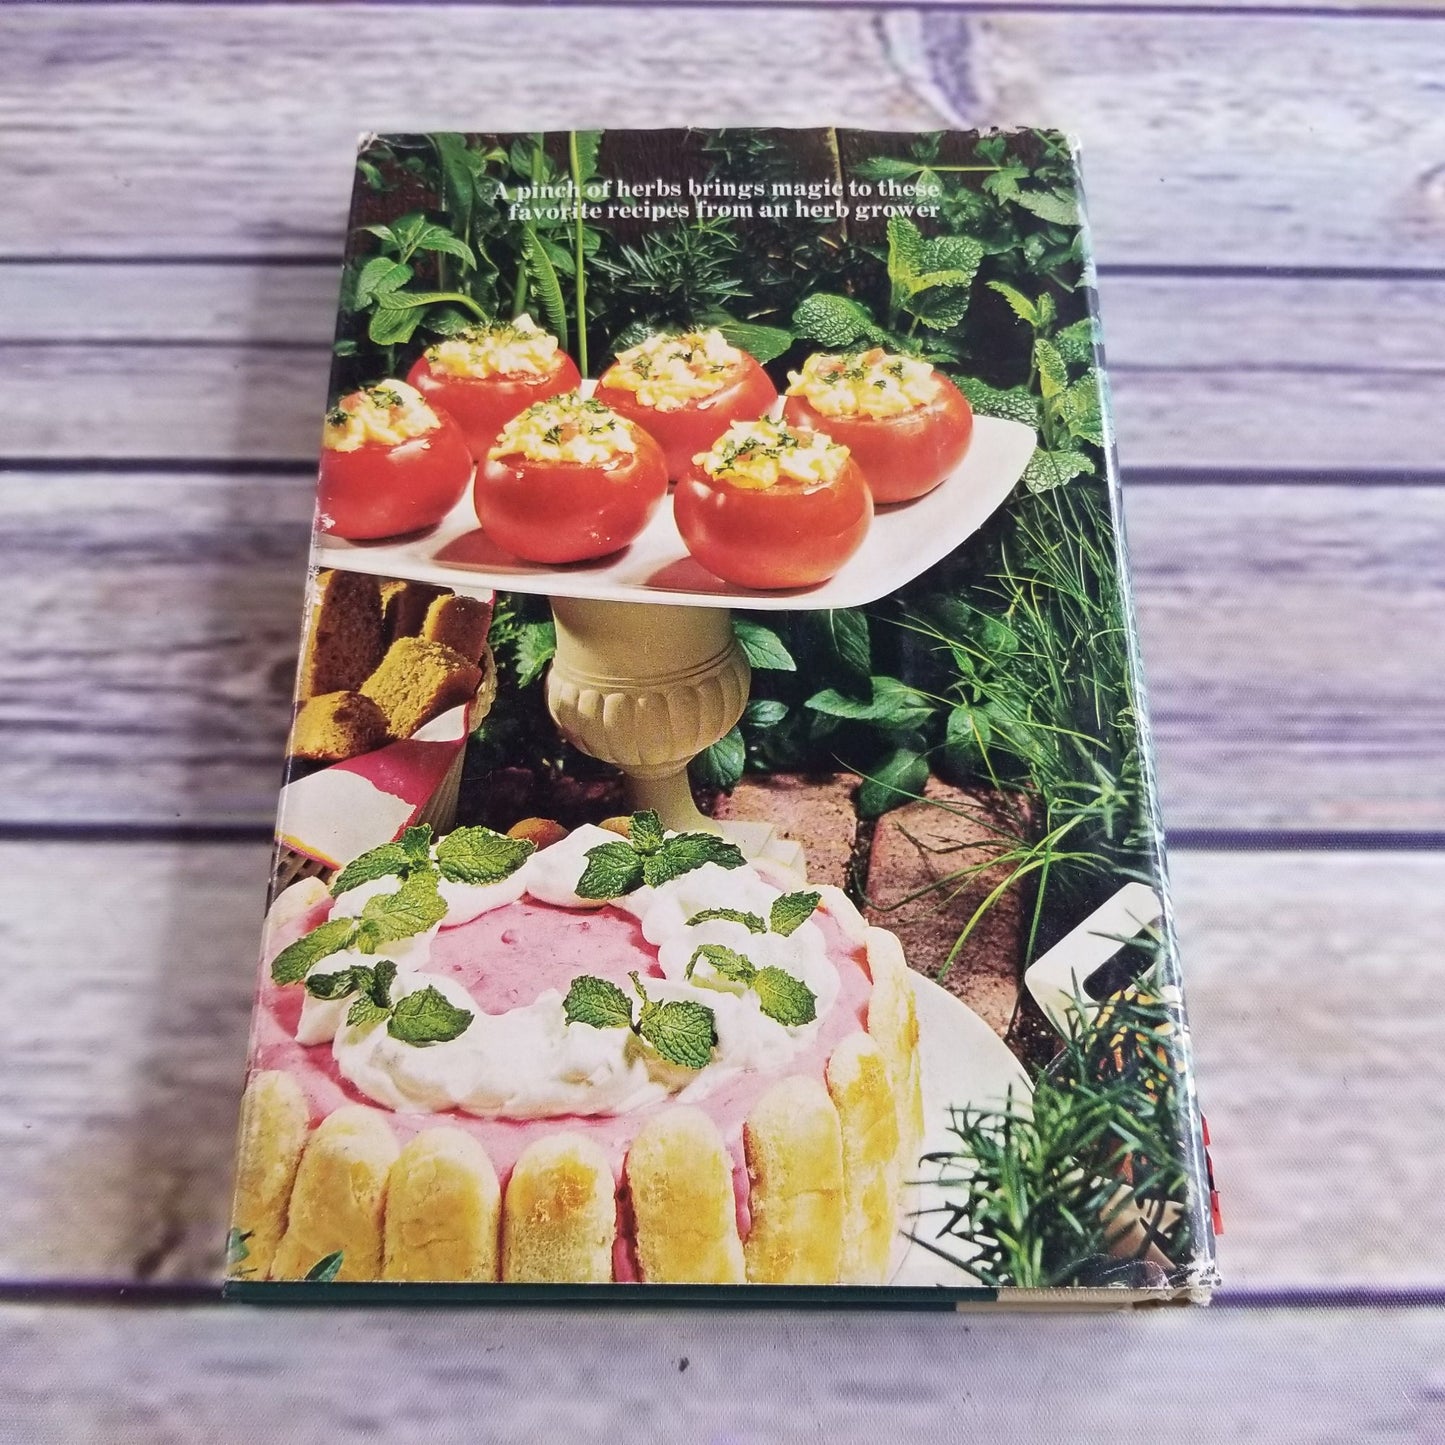 Vintage Farm Journal Herbs Cookbook Everyday Cooking with Herbs Recipes 1974 Hardcover WITH Dust Jacket Mary Collin Food Editors